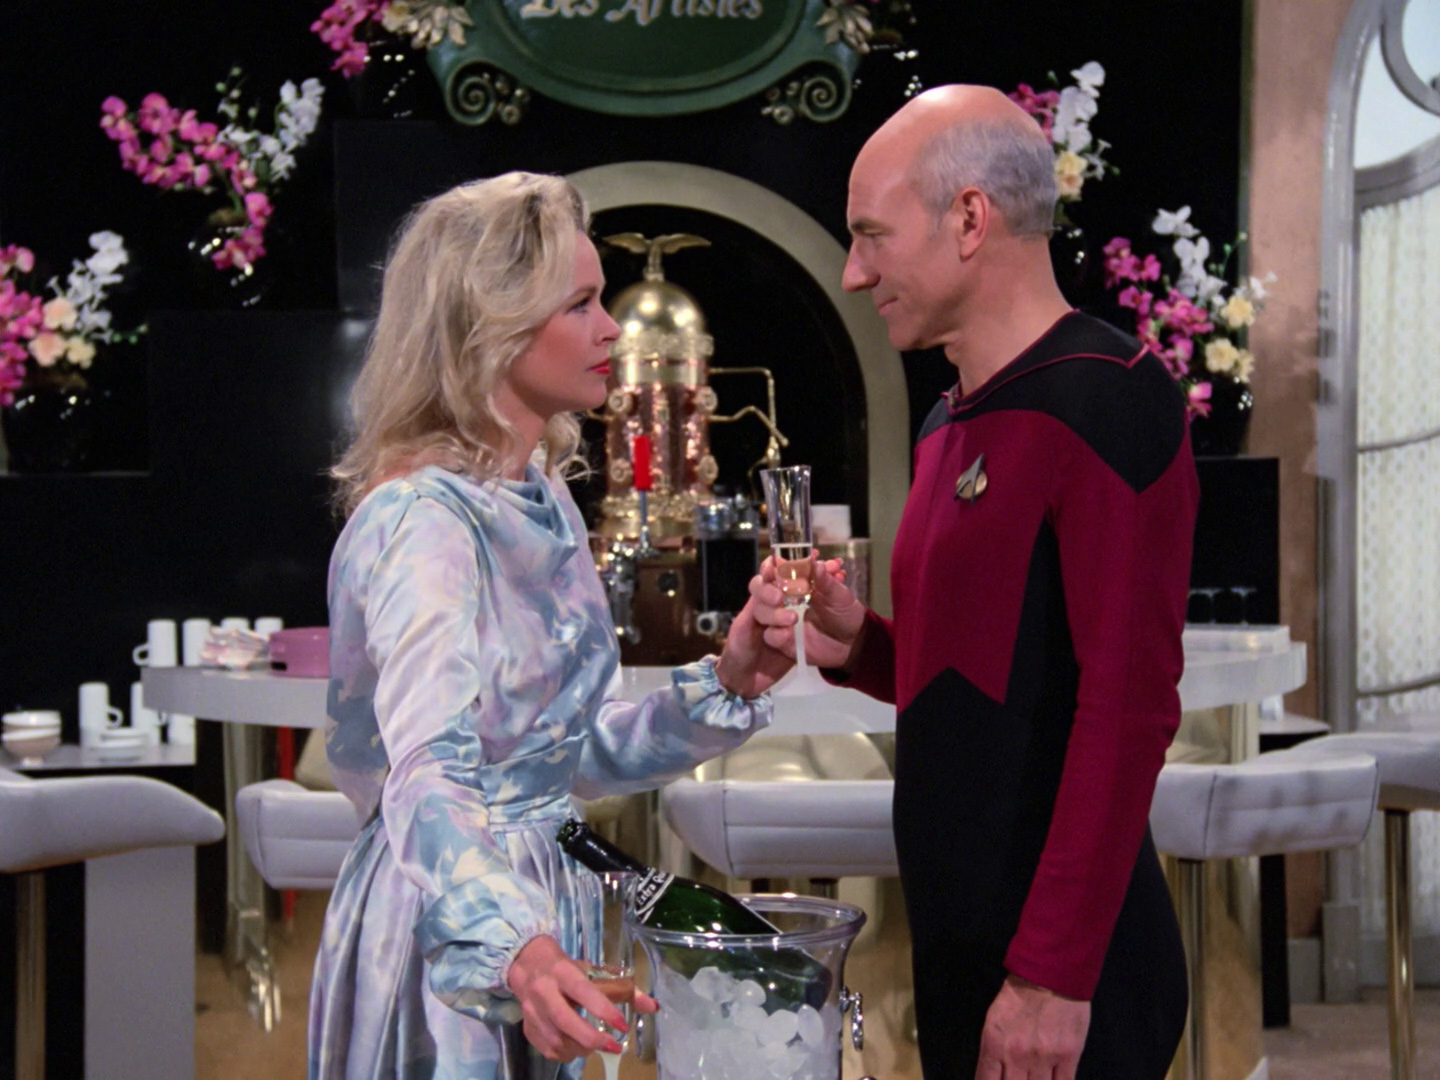 Jenise and Picard